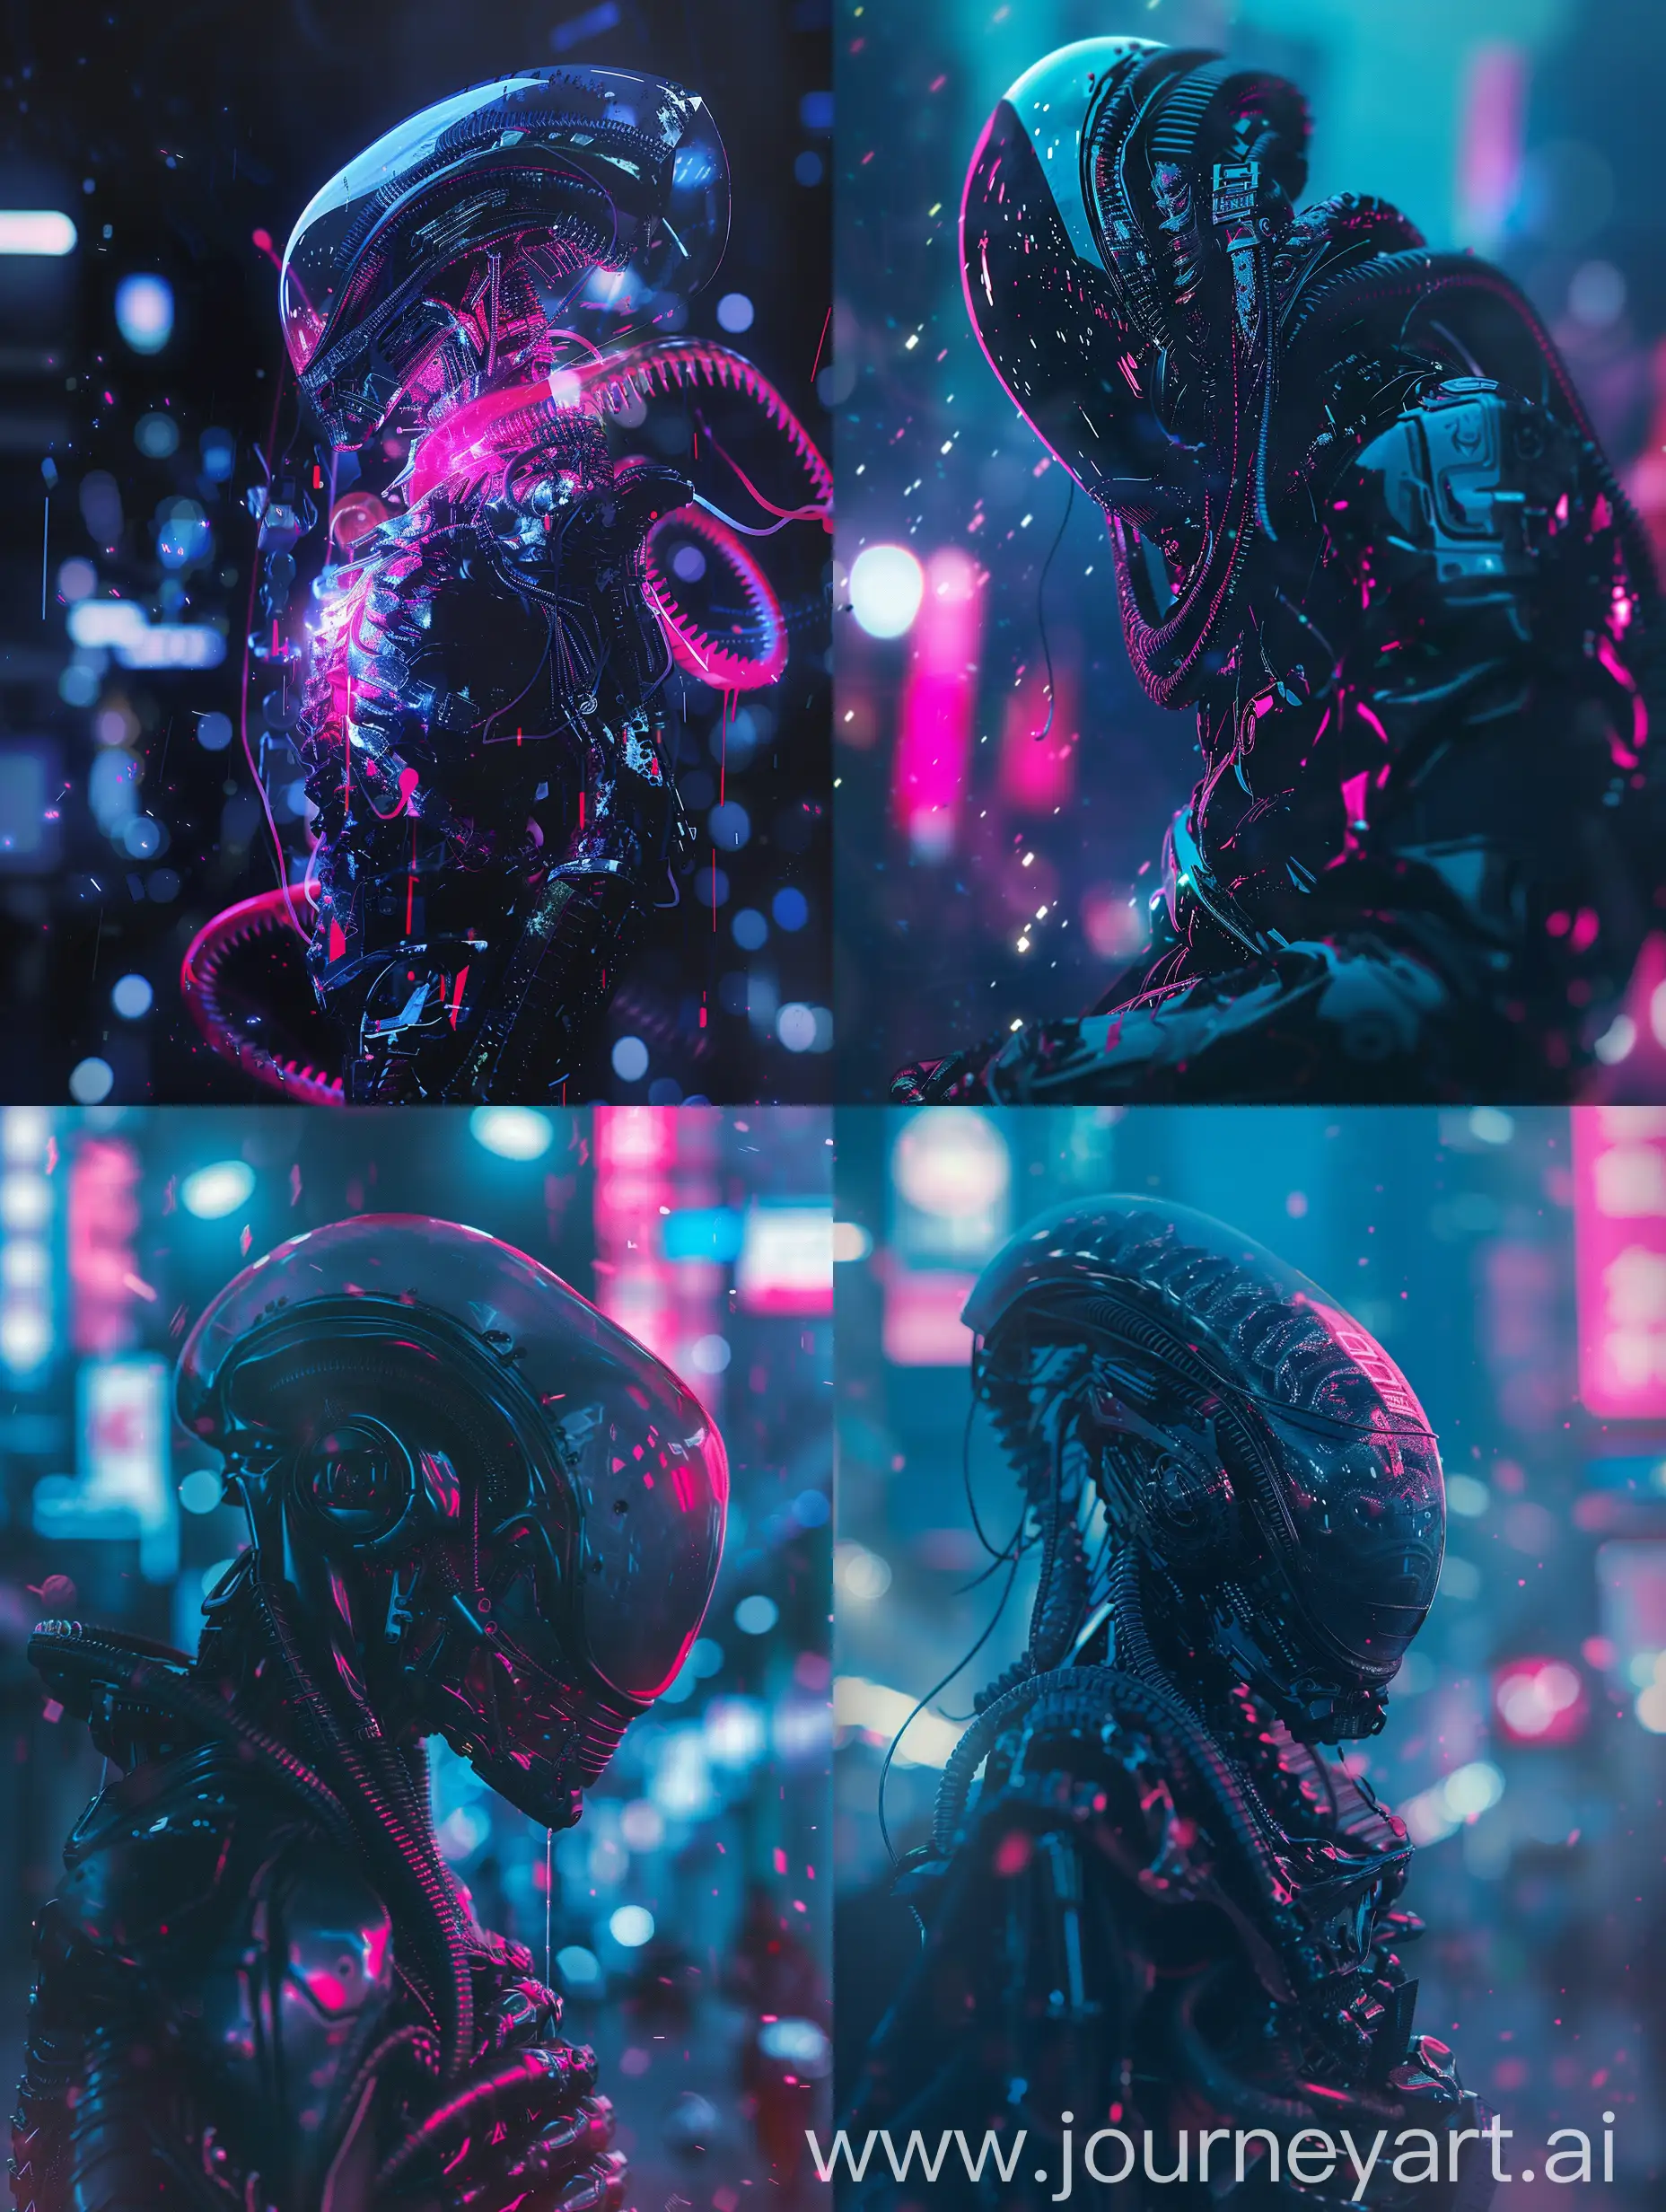 Xenomorph, cyborg, darkness, realistic, high detailed, cyberpunk concept, with subtle pink and blue gradients, futuristic, sparkling, Moonlight enveloping attire tech-punk mech-punk cityscape.